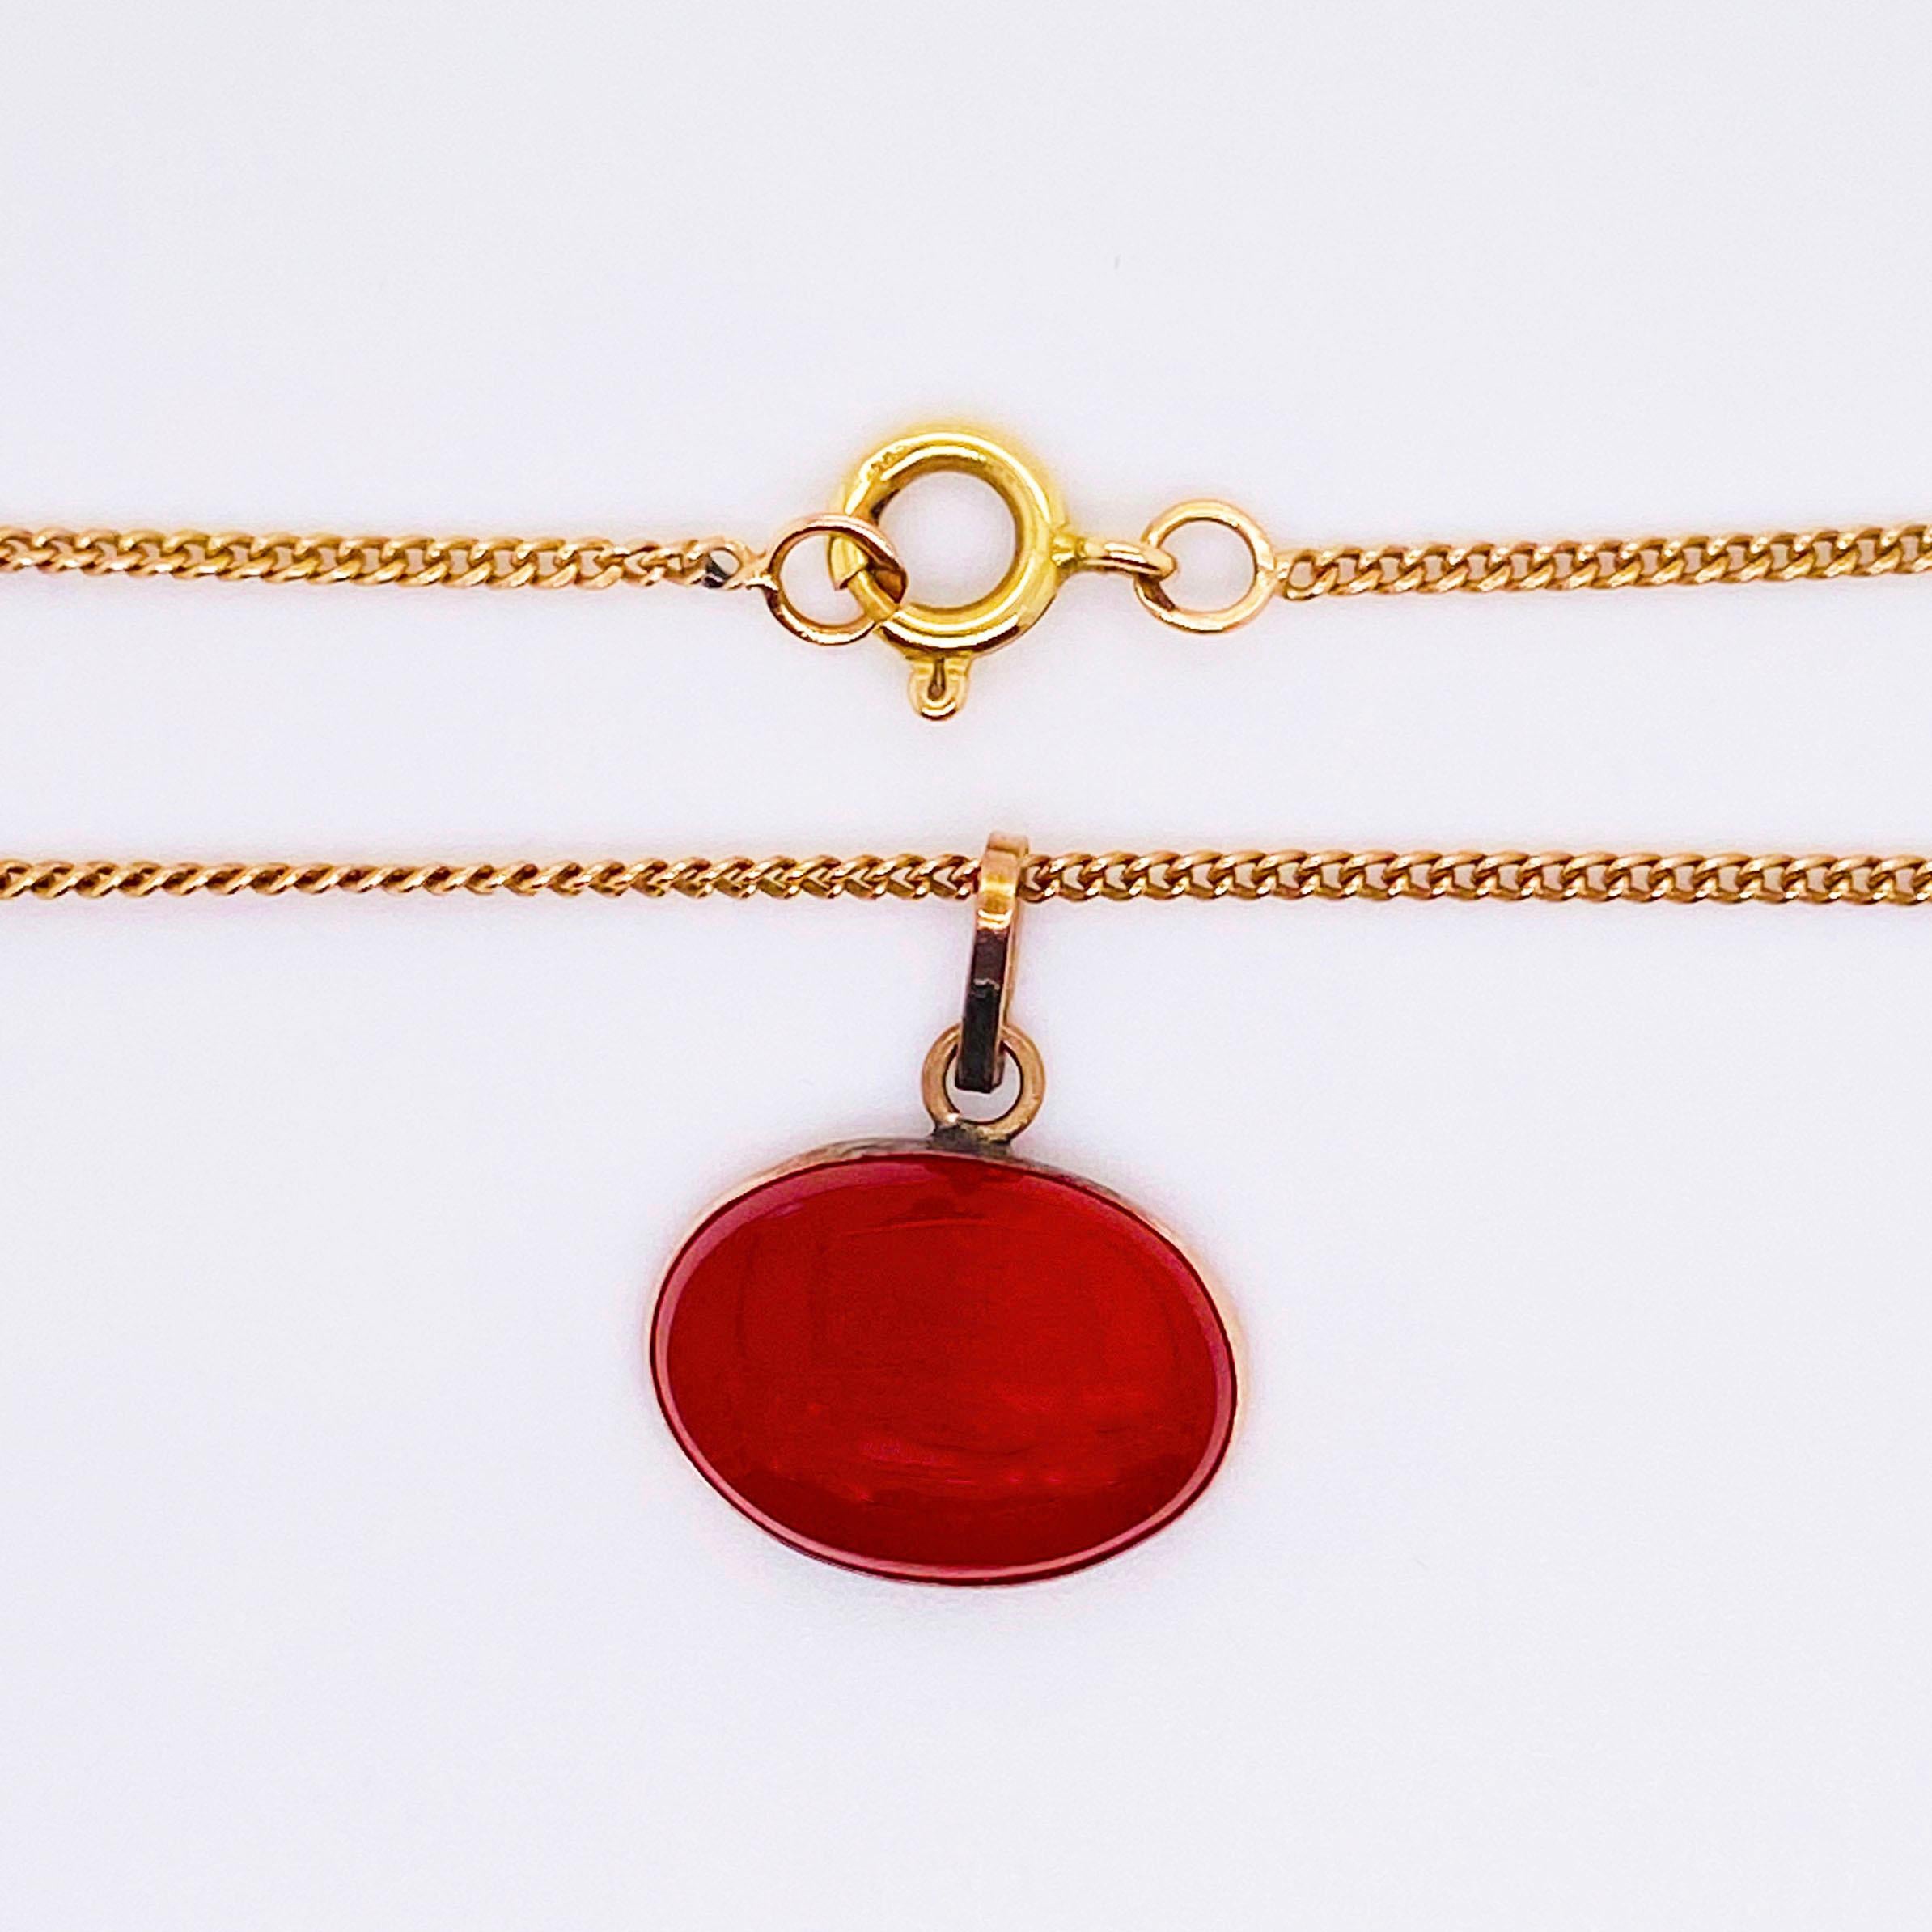 This striking genuine carnelian pendant is the same gemstone that is used to carve cameos!  This blood orange color of carnelian is very rare and this piece is at least 100 years old!  The pendant was originally worn by a woman in the 1920’s who